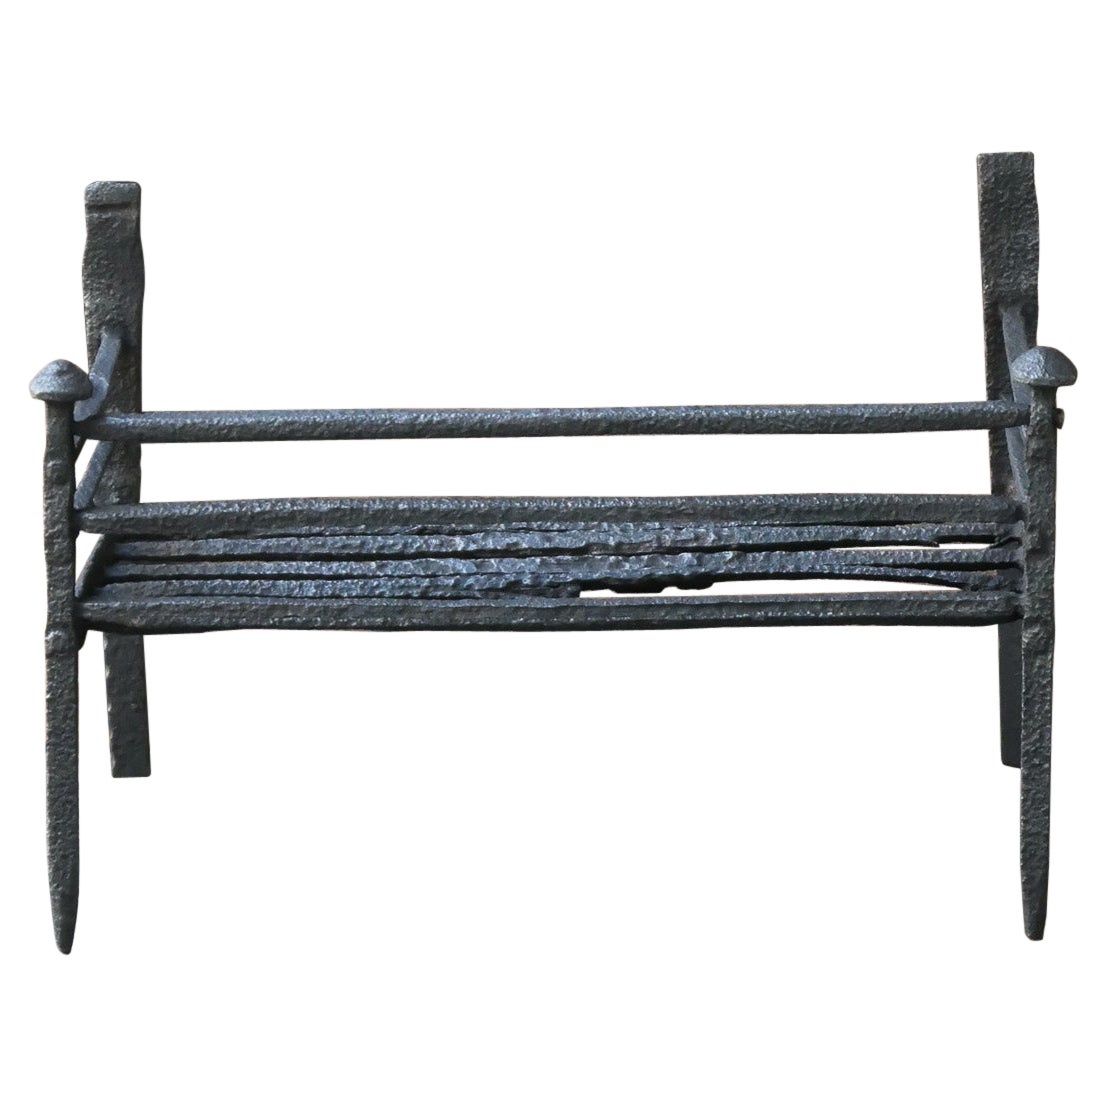 Antique French Gothic Fireplace Grate or Fire Basket, 17th - 18th Century For Sale